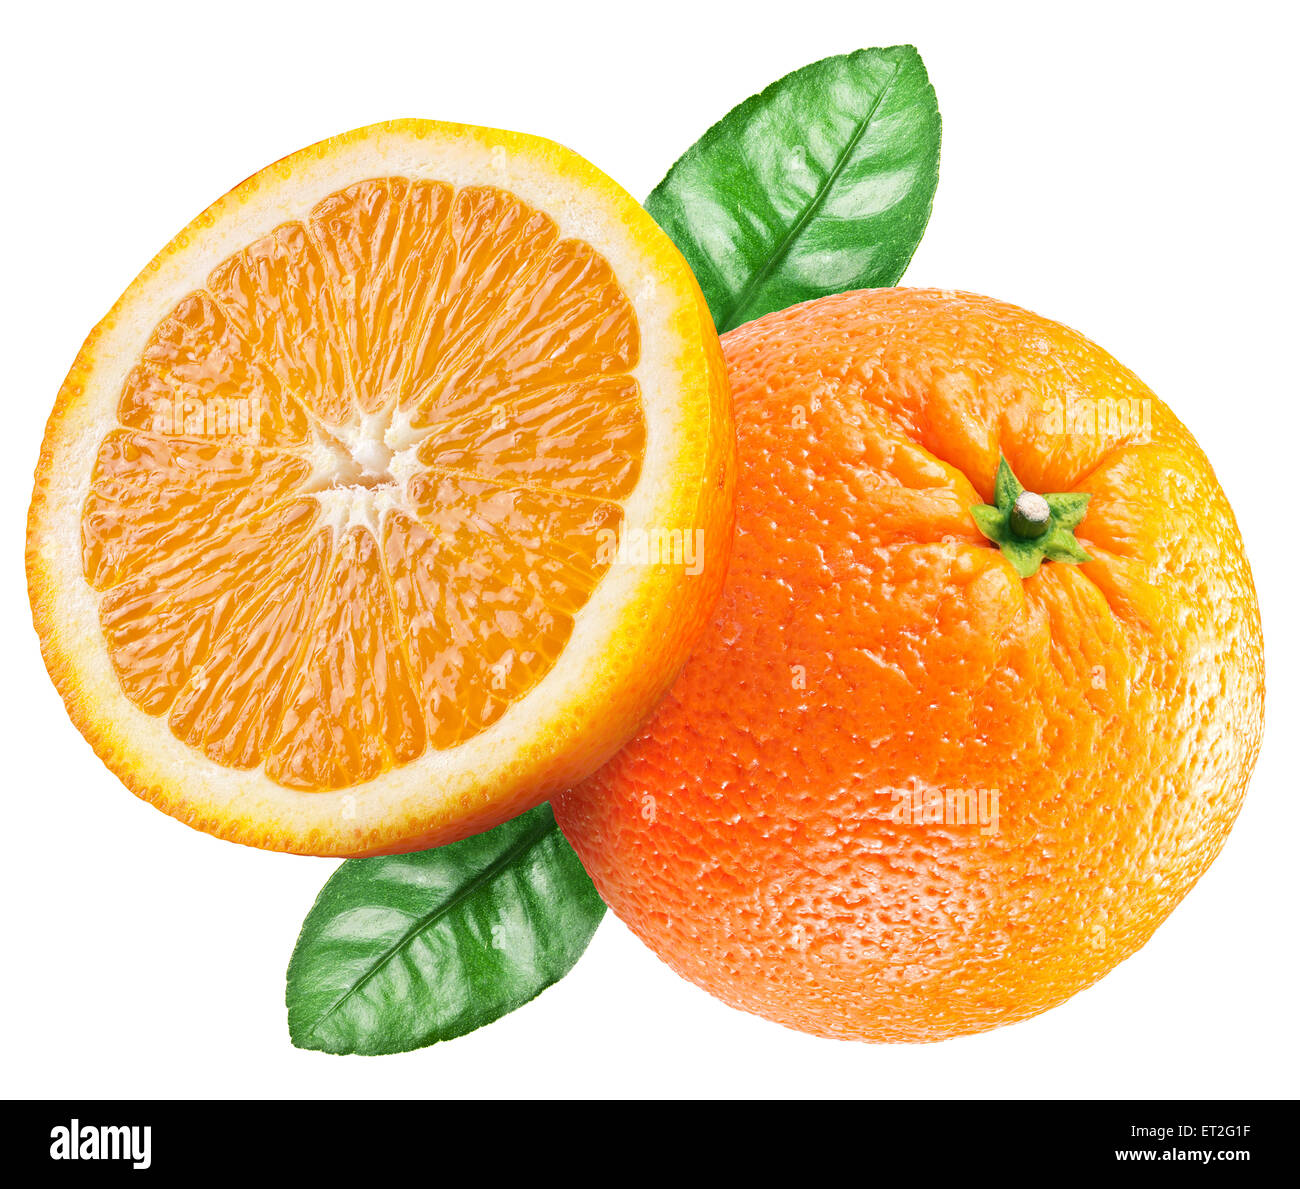 Ripe orange and half of the fruit. File contains clipping paths. Stock Photo